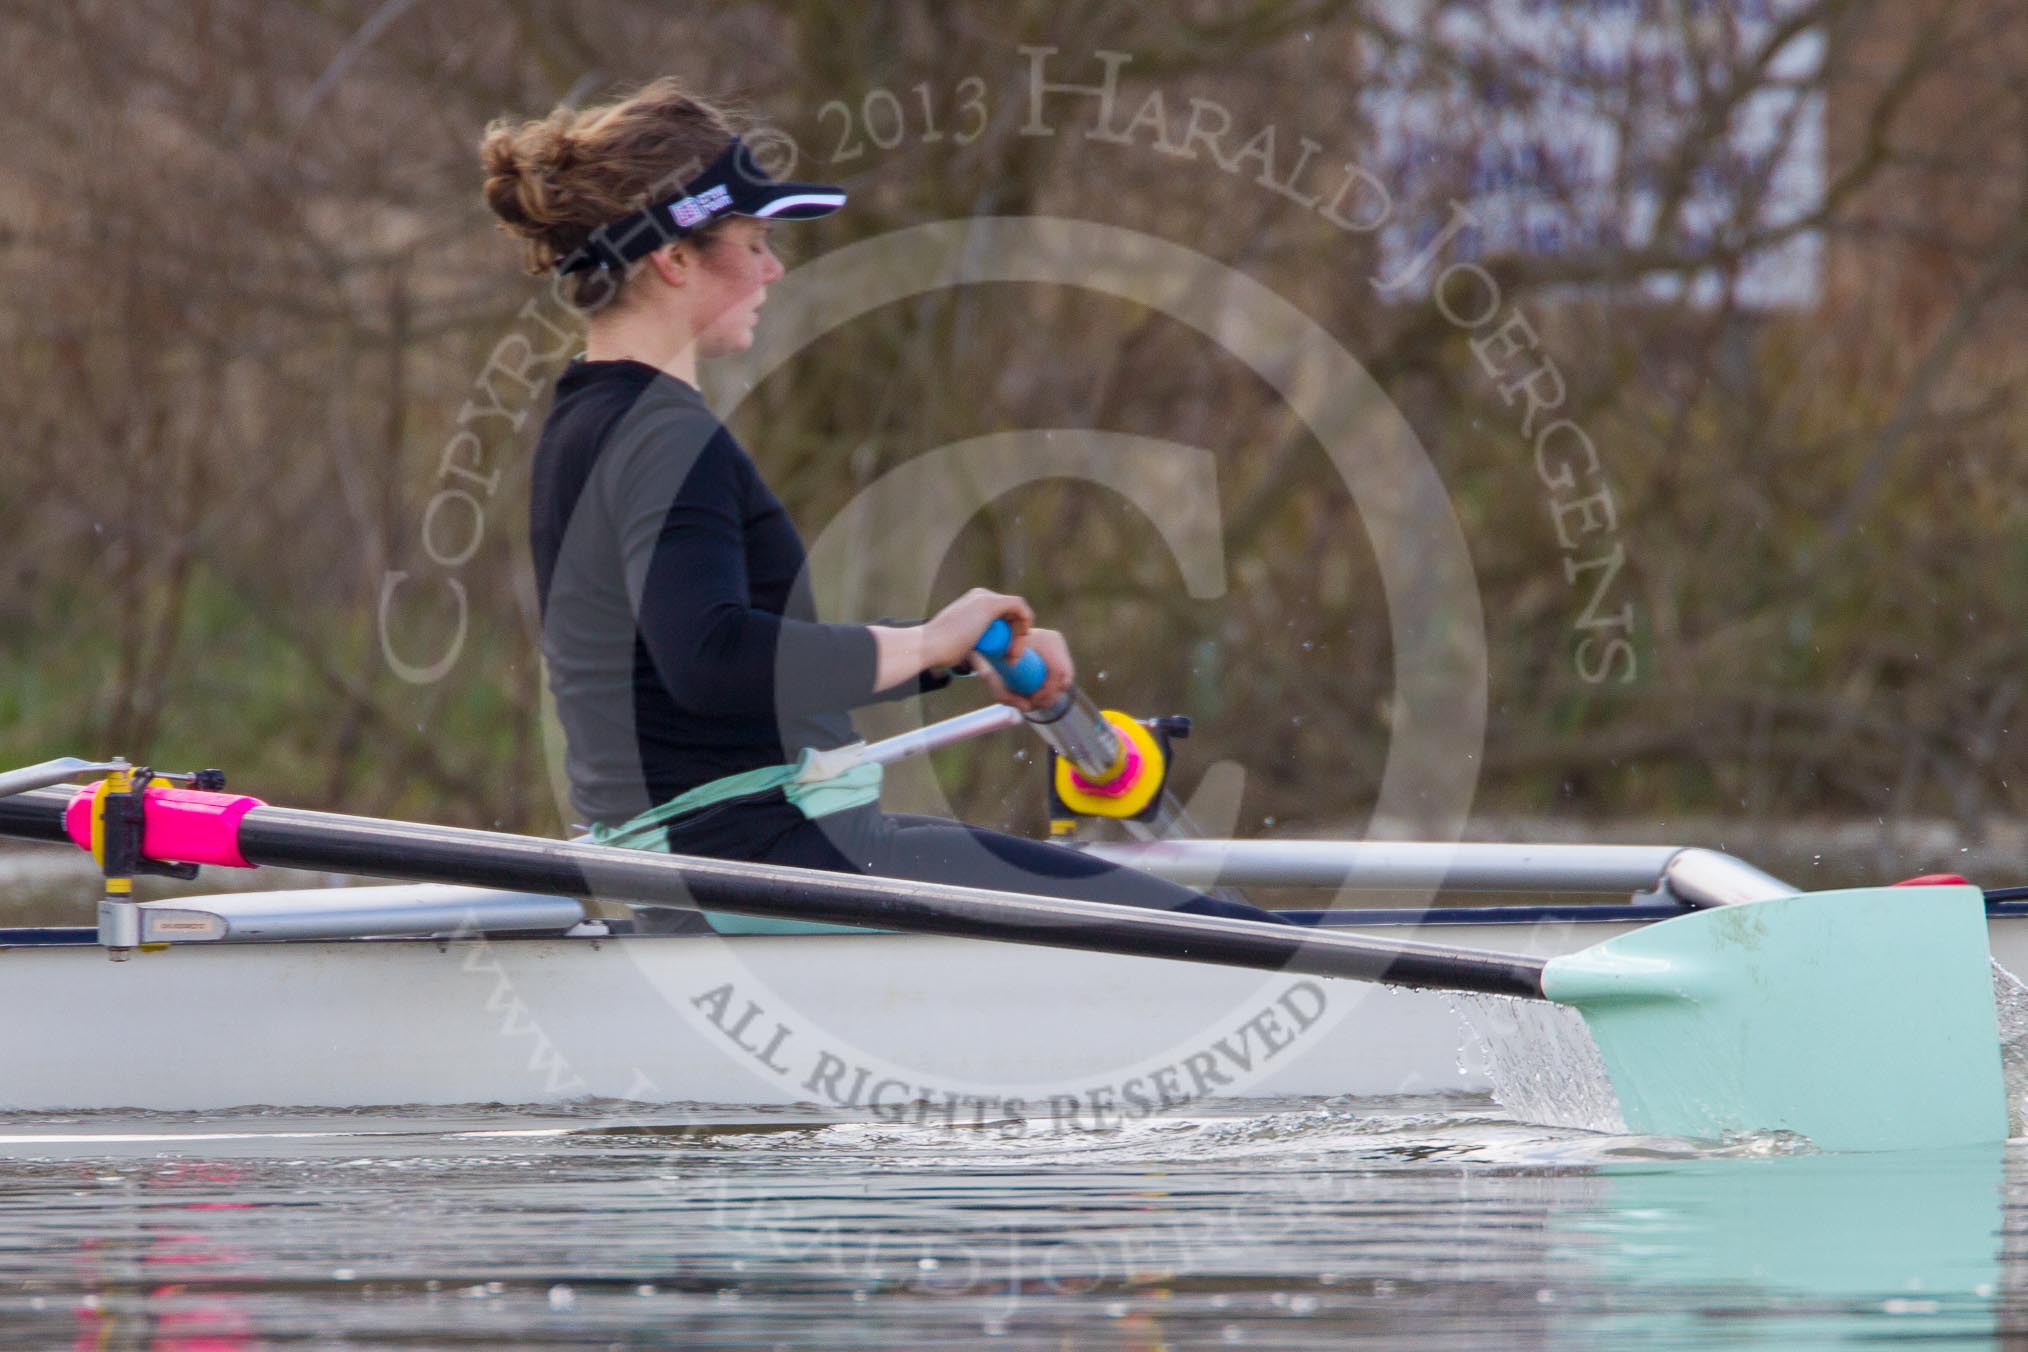 The Boat Race season 2013 - CUWBC training: In the CUWBC Blue Boat stroke Holly Game..
River Thames near Remenham,
Henley-on-Thames,
Oxfordshire,
United Kingdom,
on 19 March 2013 at 15:39, image #65